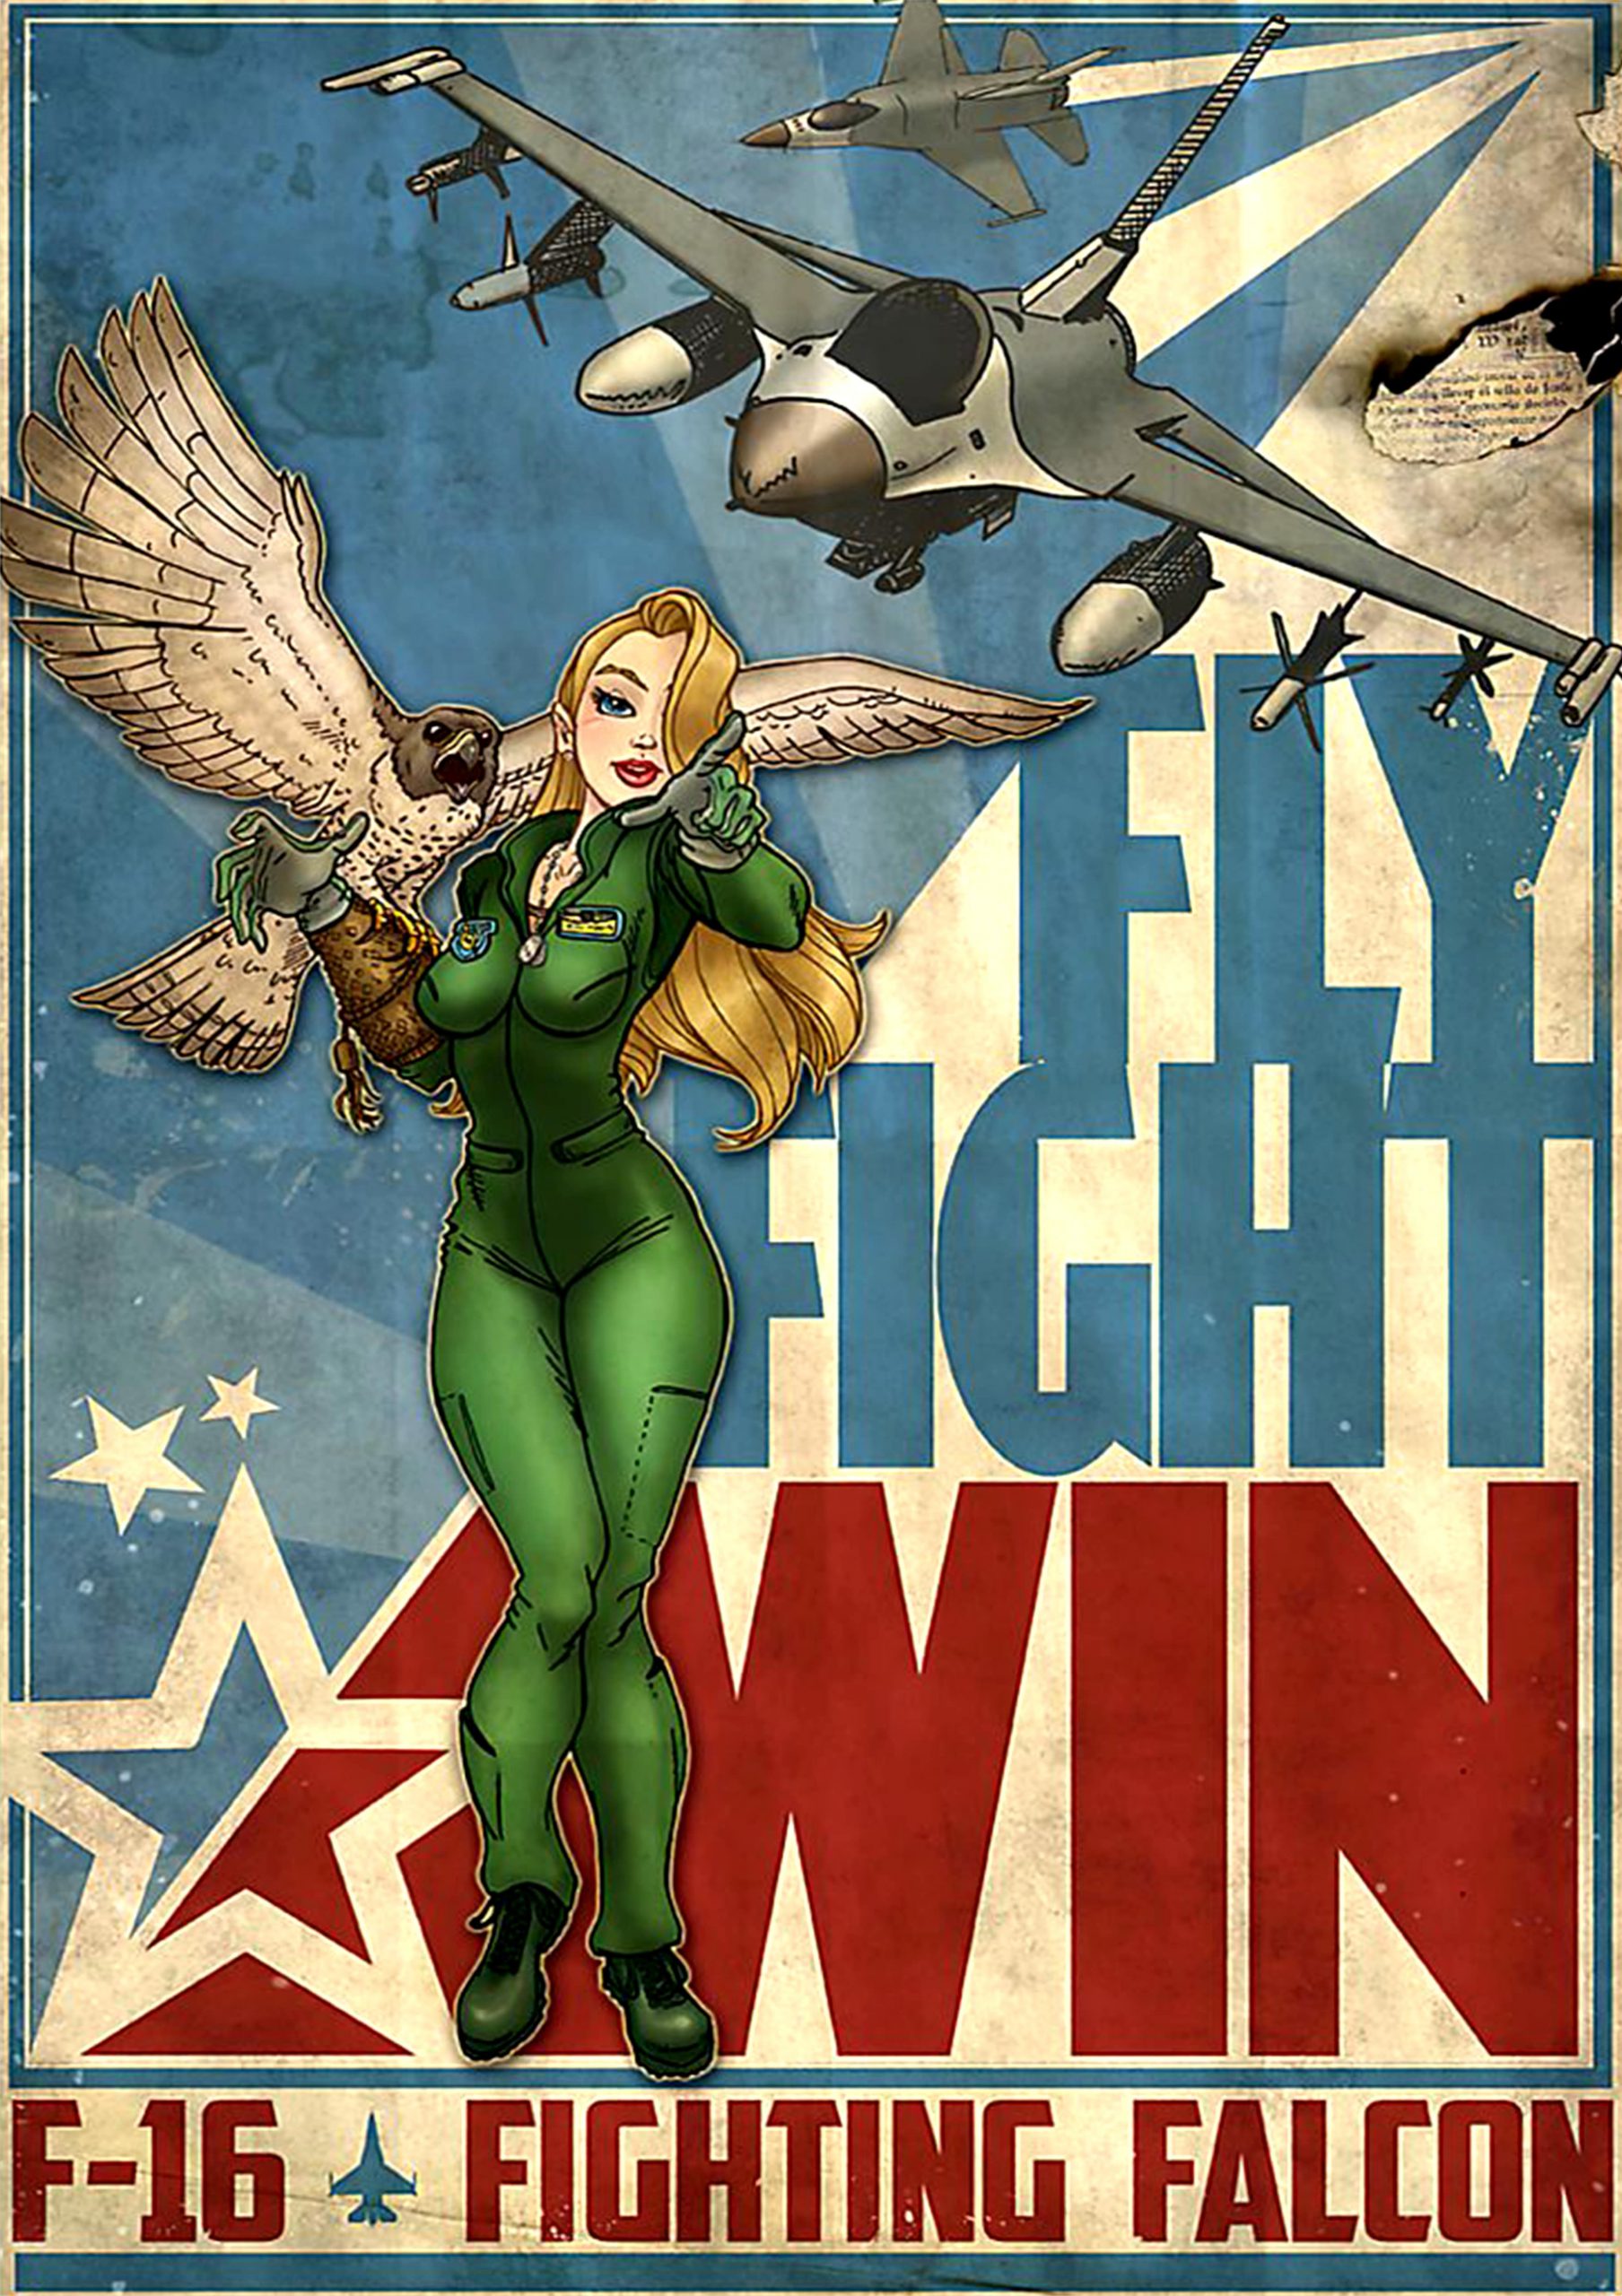 vintage fly fight win f-16 fighting falcon poster 1 - Copy (2)